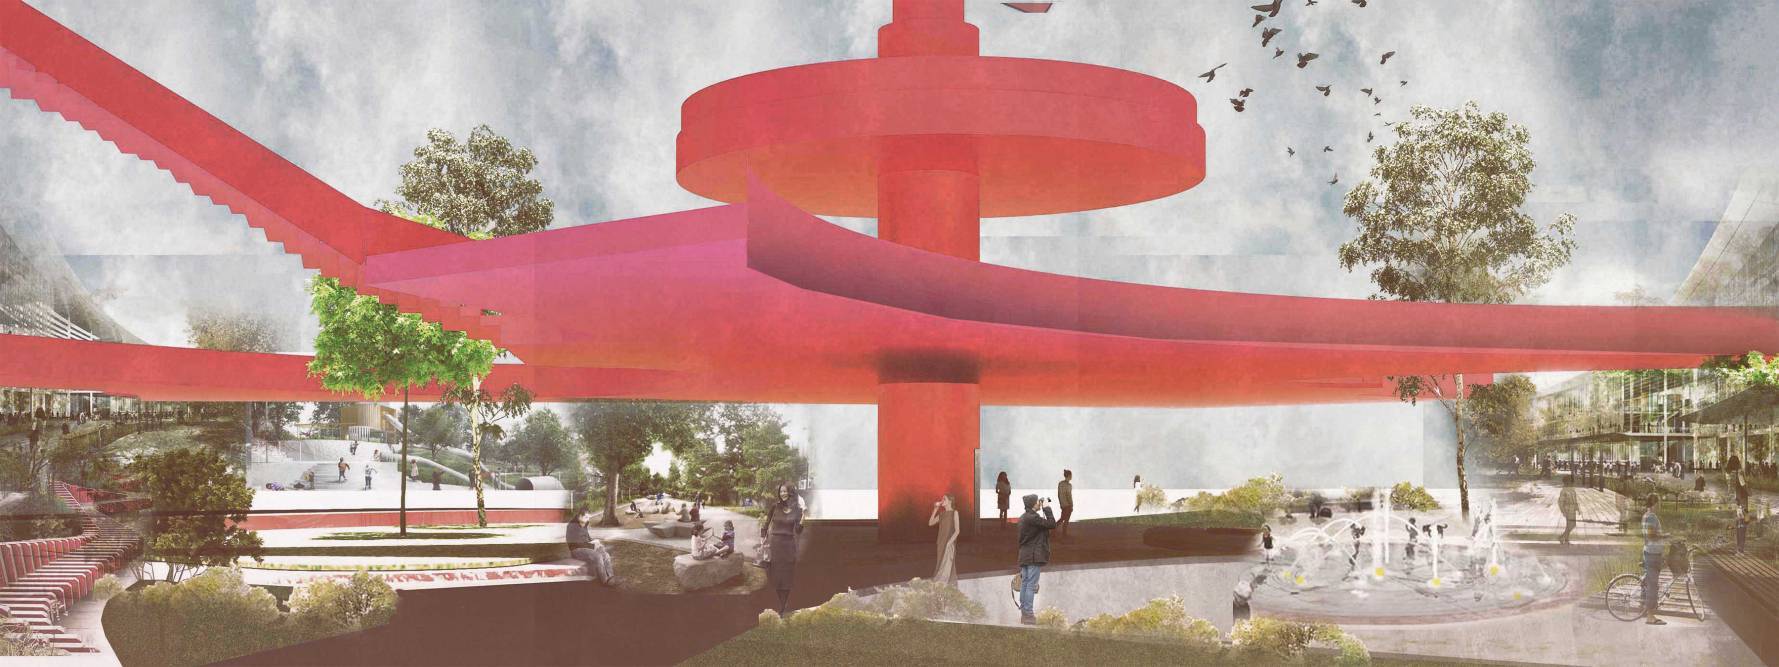 An architecture design featuring a red platform that appears to float